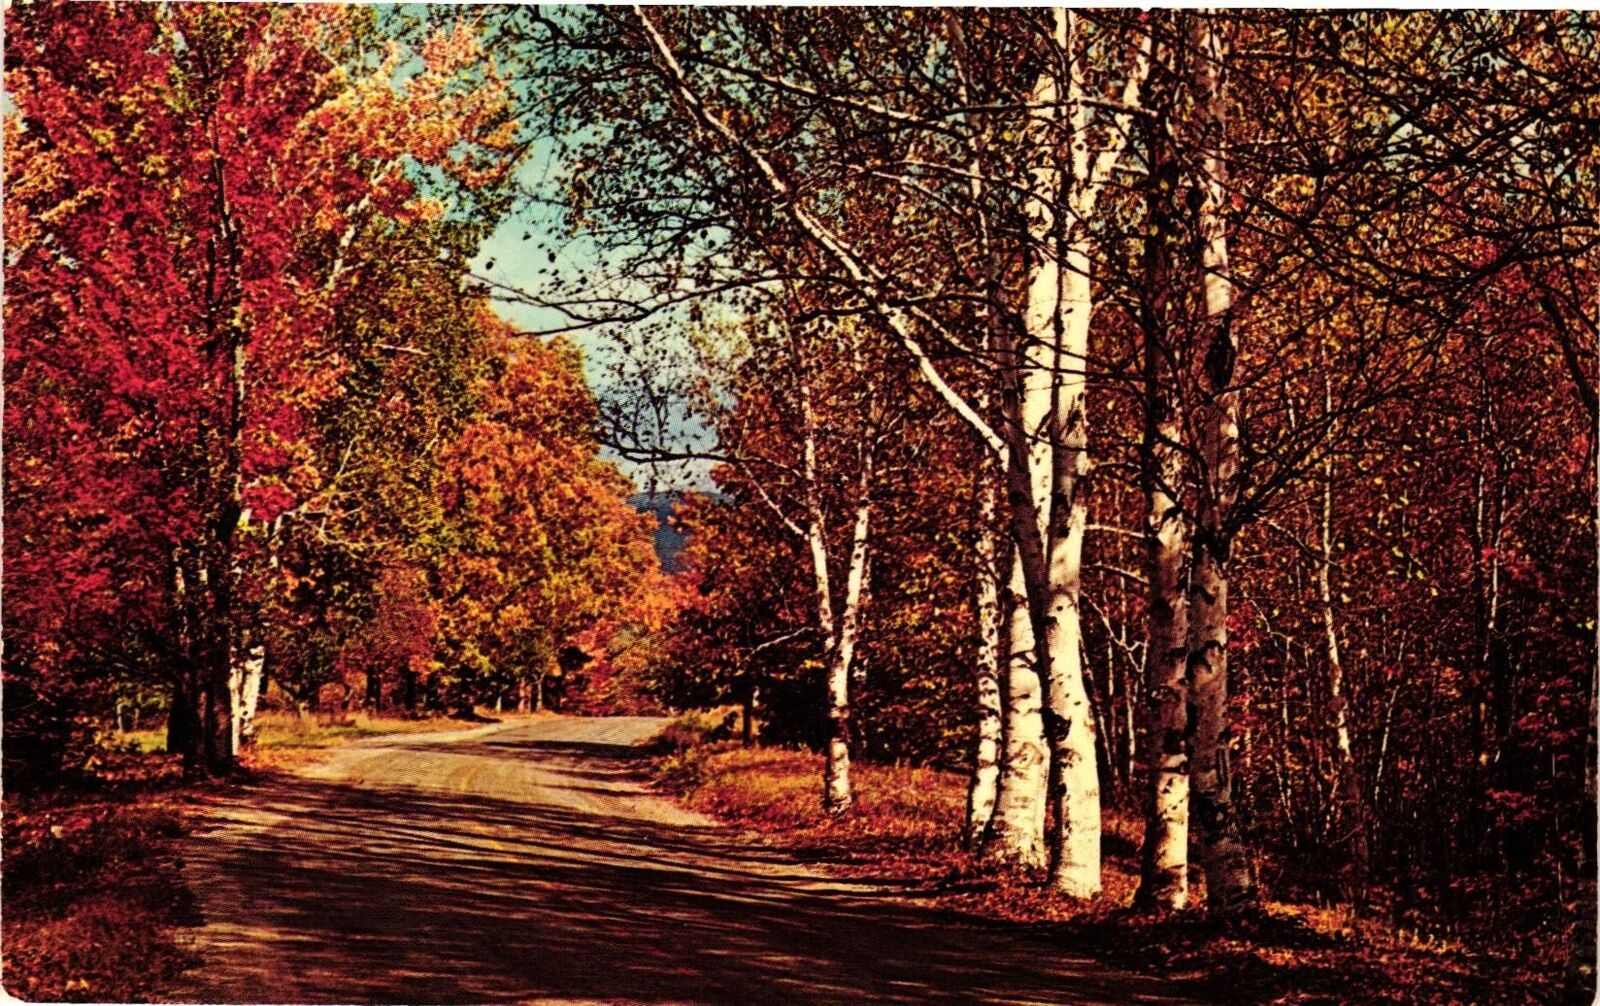 Vintage Postcard- Country Road in Autumn. 1960s